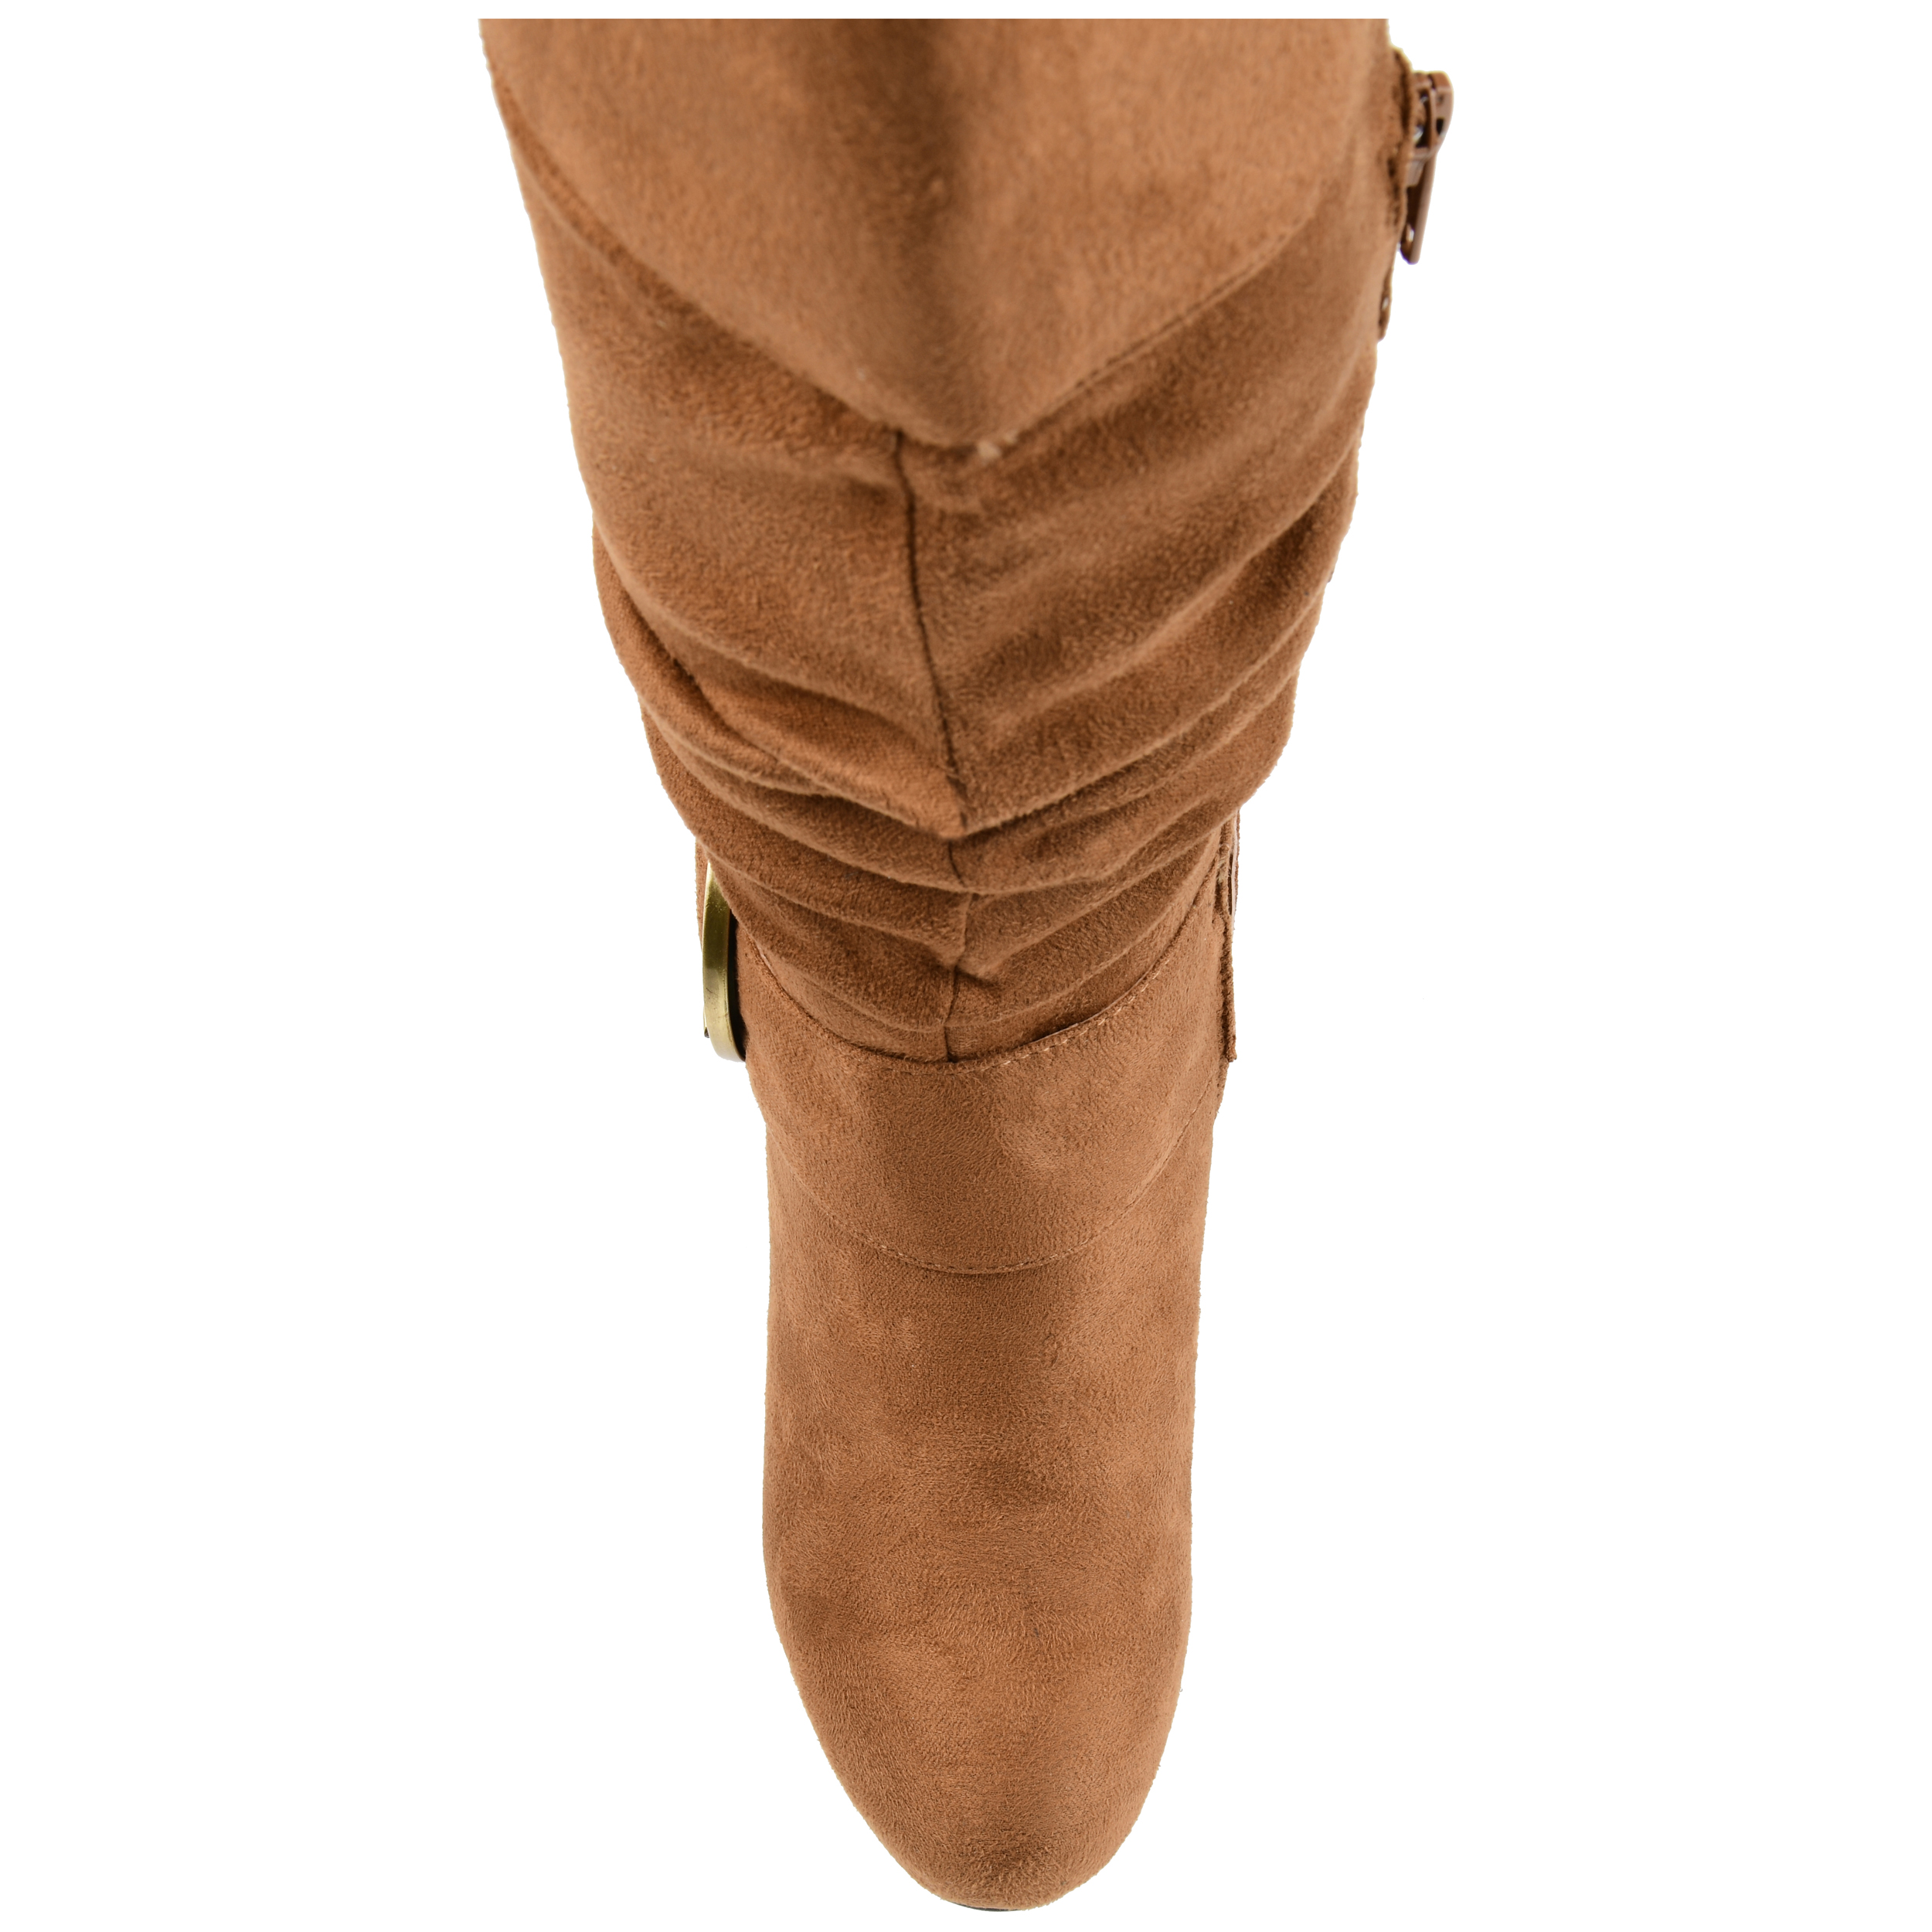 Brinley Co. Women's Faux Suede Buckle Accent Tall Boots - image 5 of 8